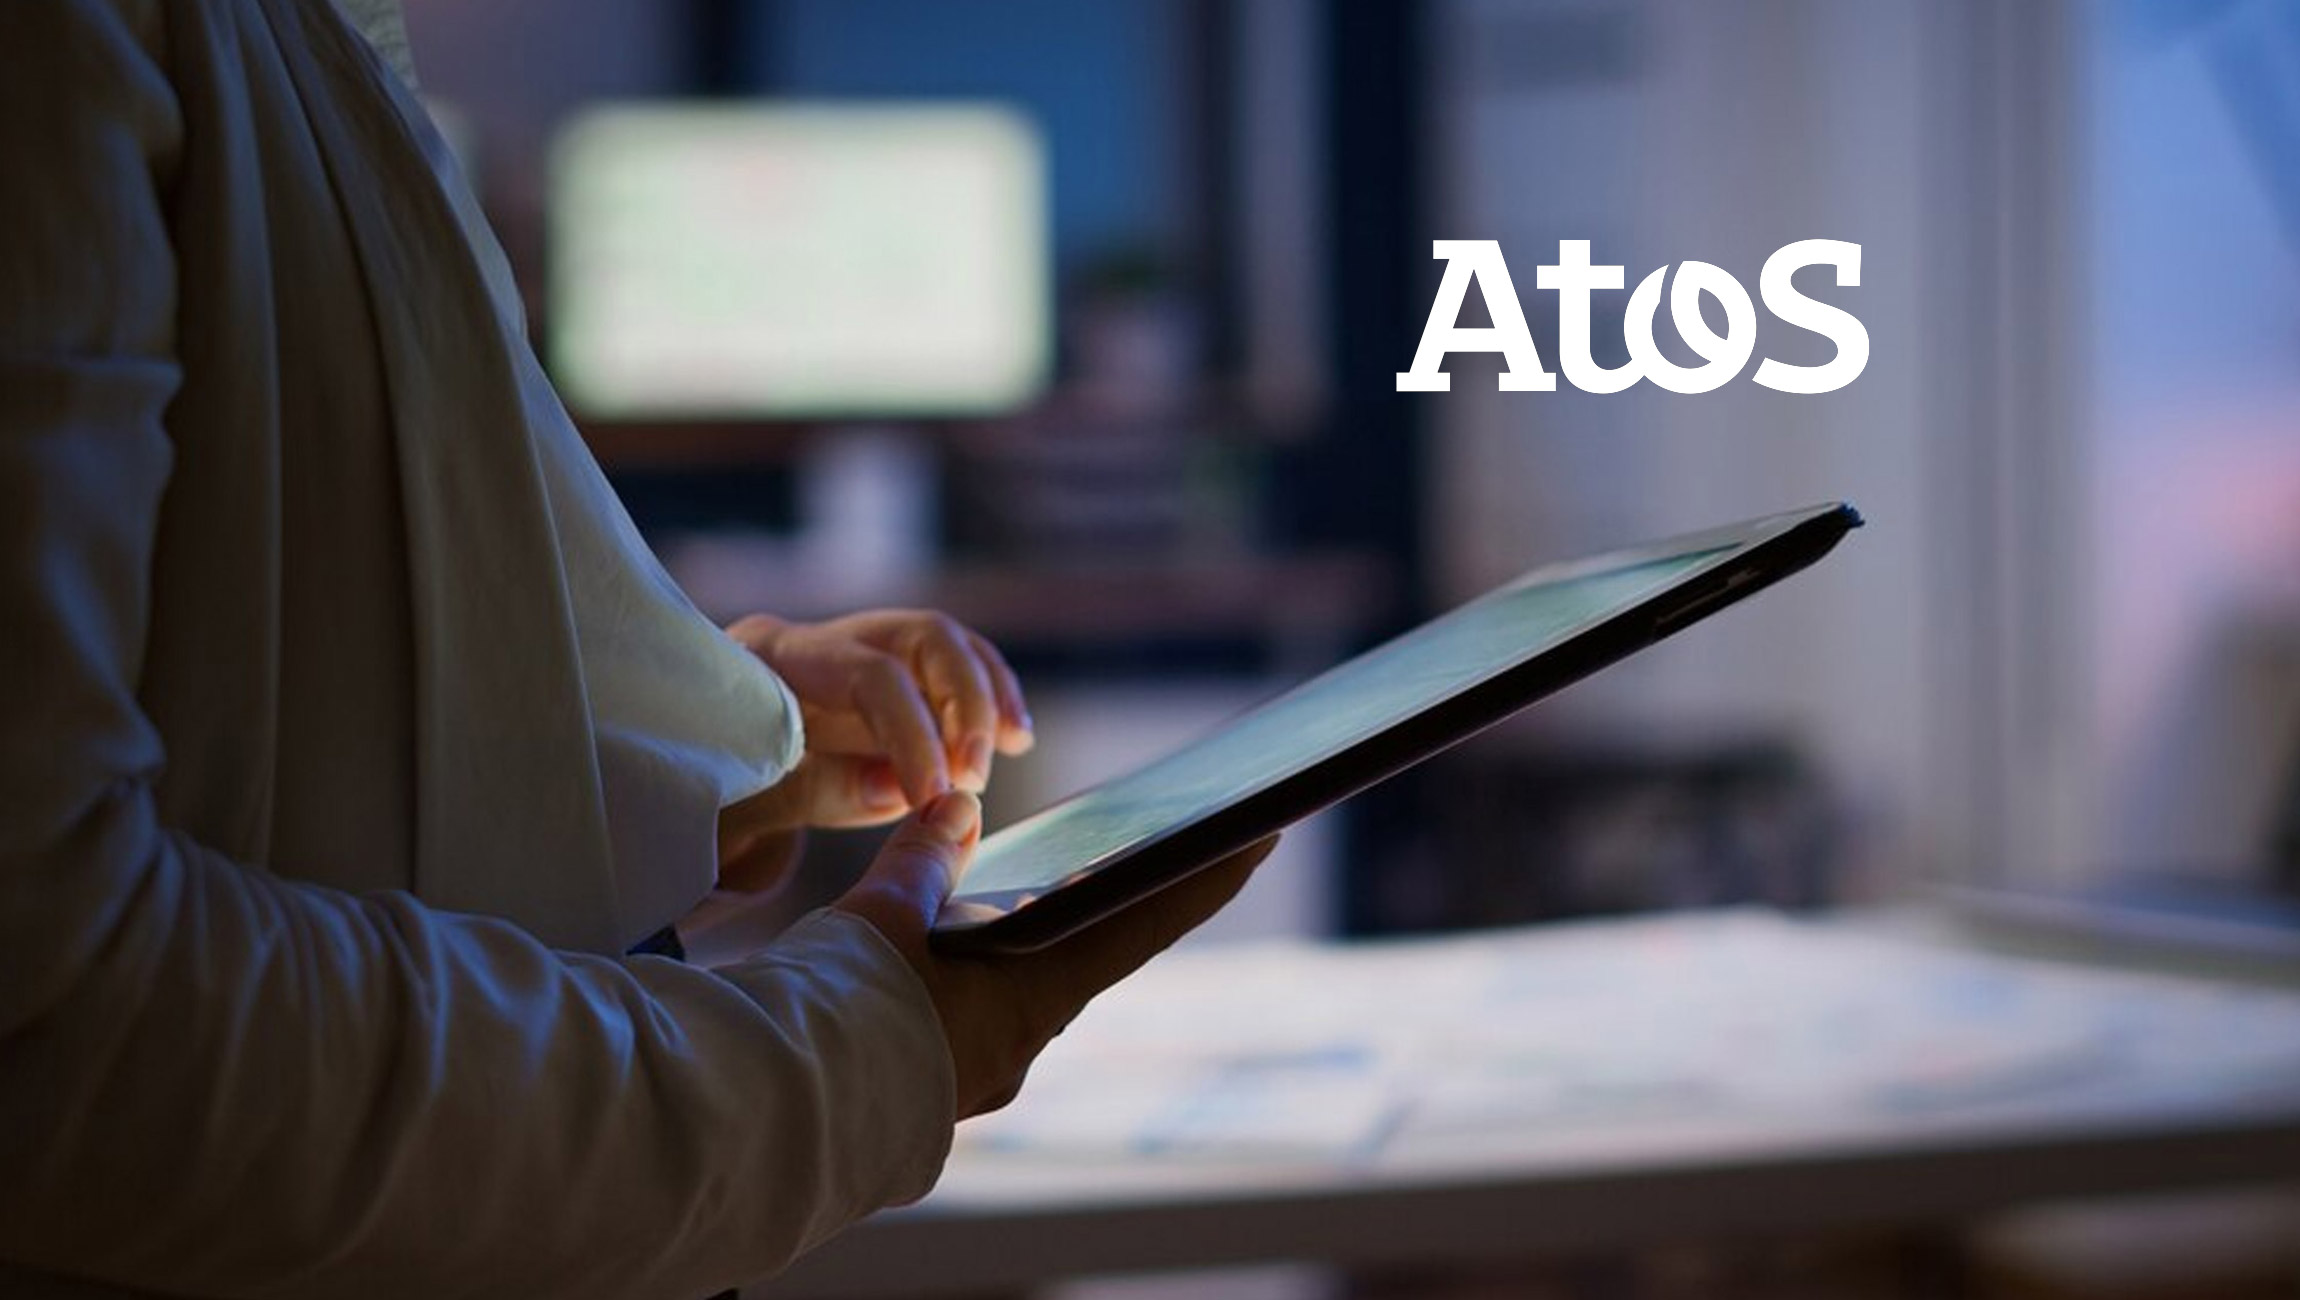 Atos positioned as a Leader in the Gartner® Magic Quadrant™ for Outsourced Digital Workplace Services report